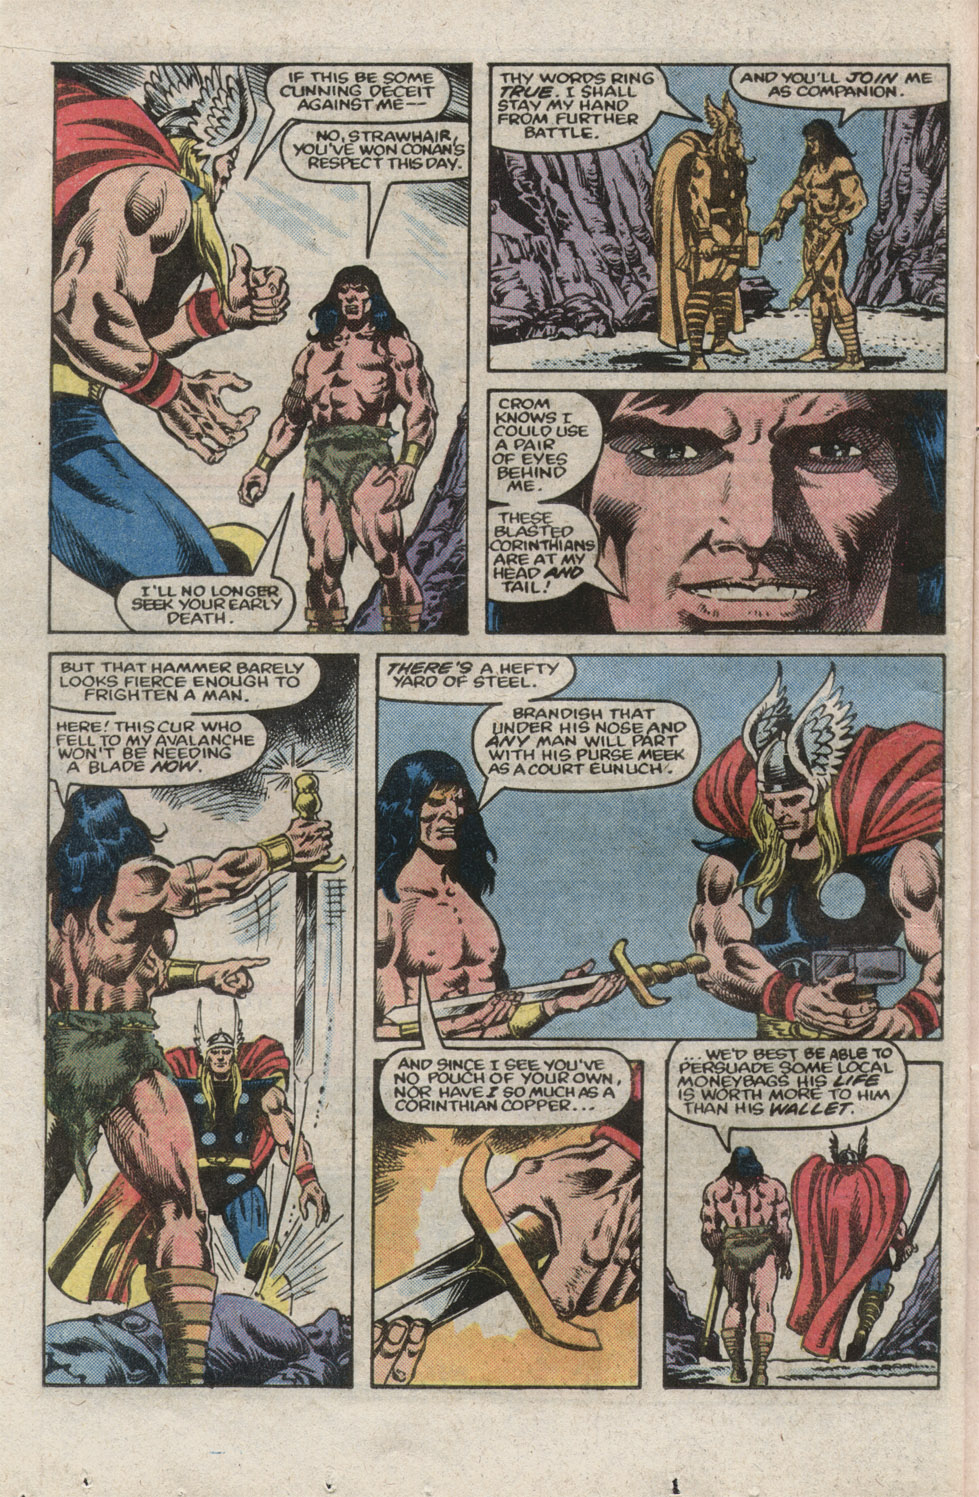 What If? (1977) issue 39 - Thor battled conan - Page 16